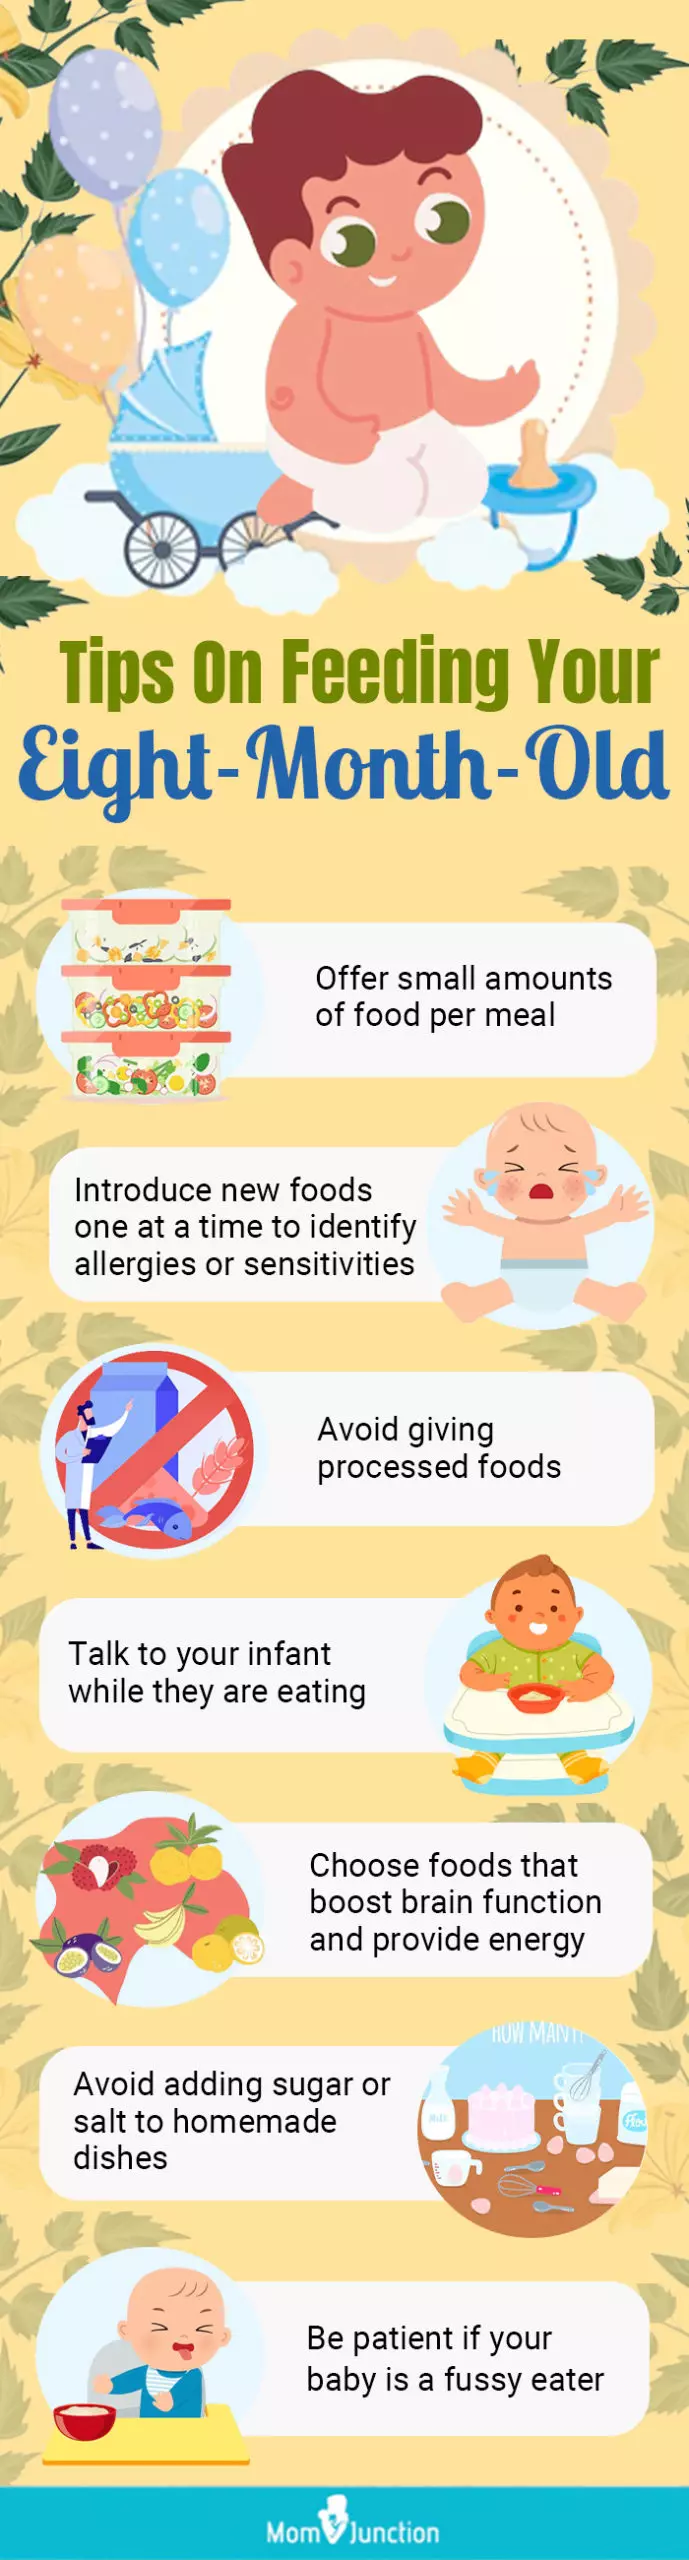 tips on feeding your eight month old (infographic)